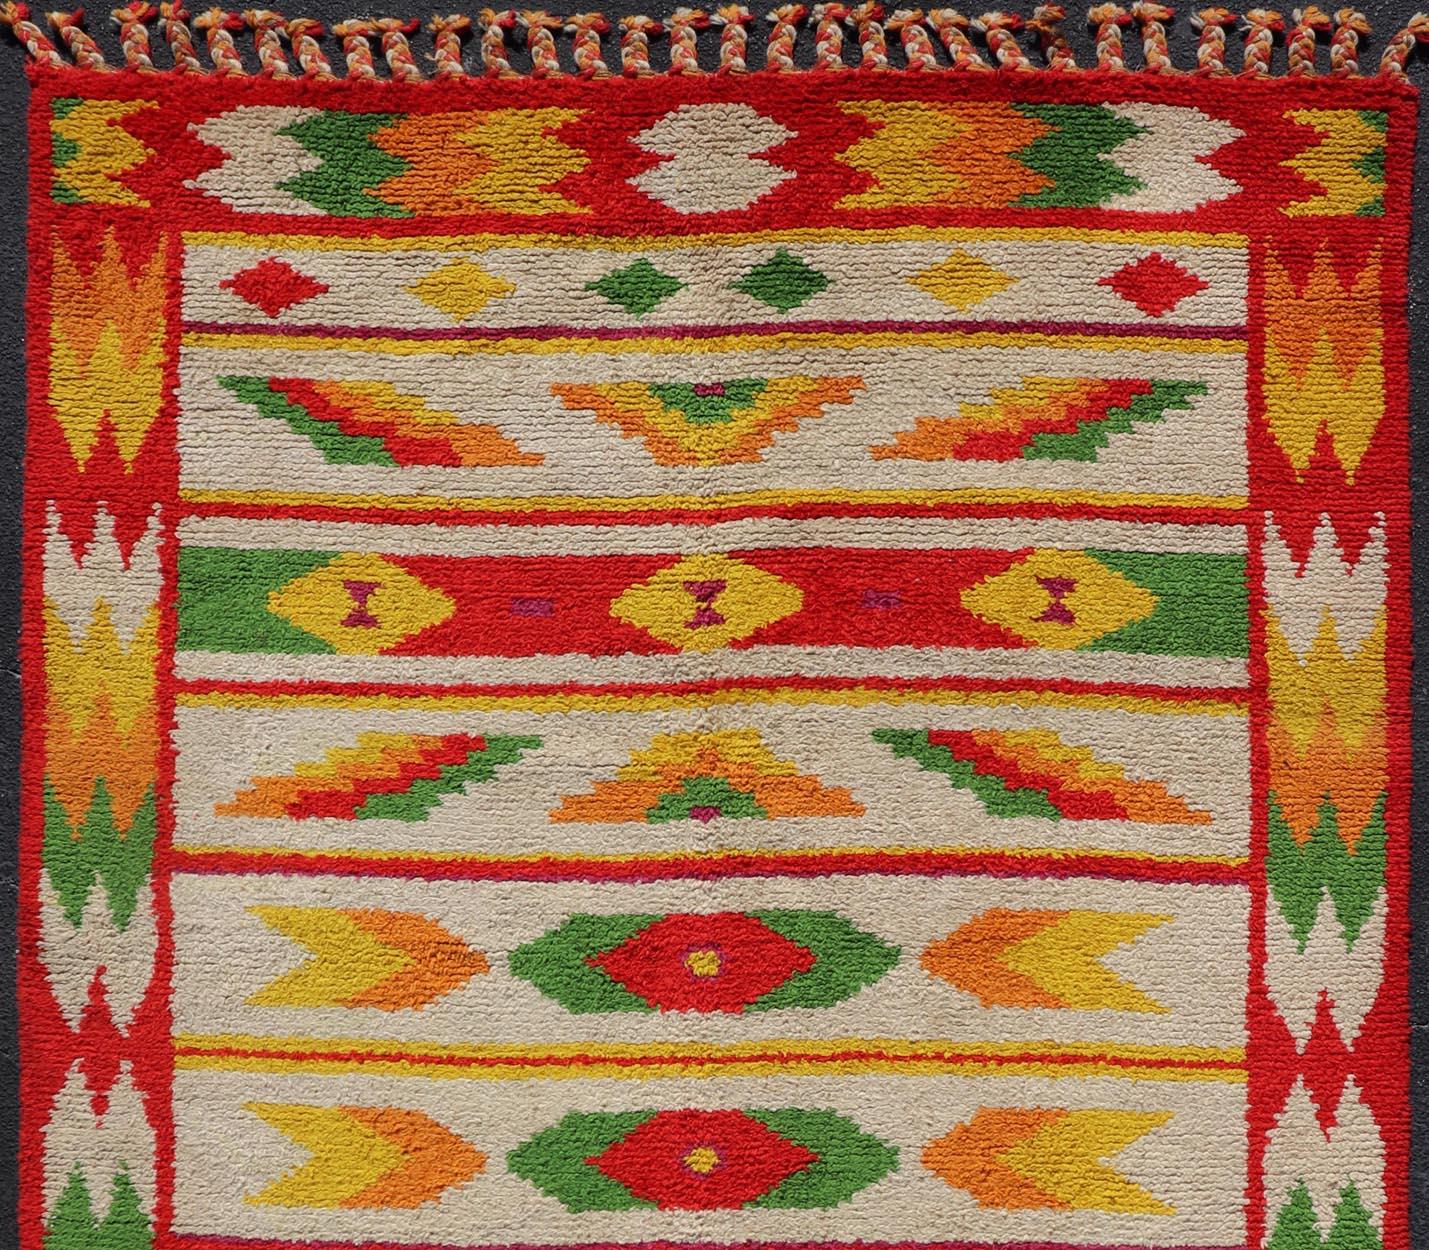 Vintage Moroccan Rug with All-Over Tribal Motif Design In Red, Green & Yellow For Sale 1